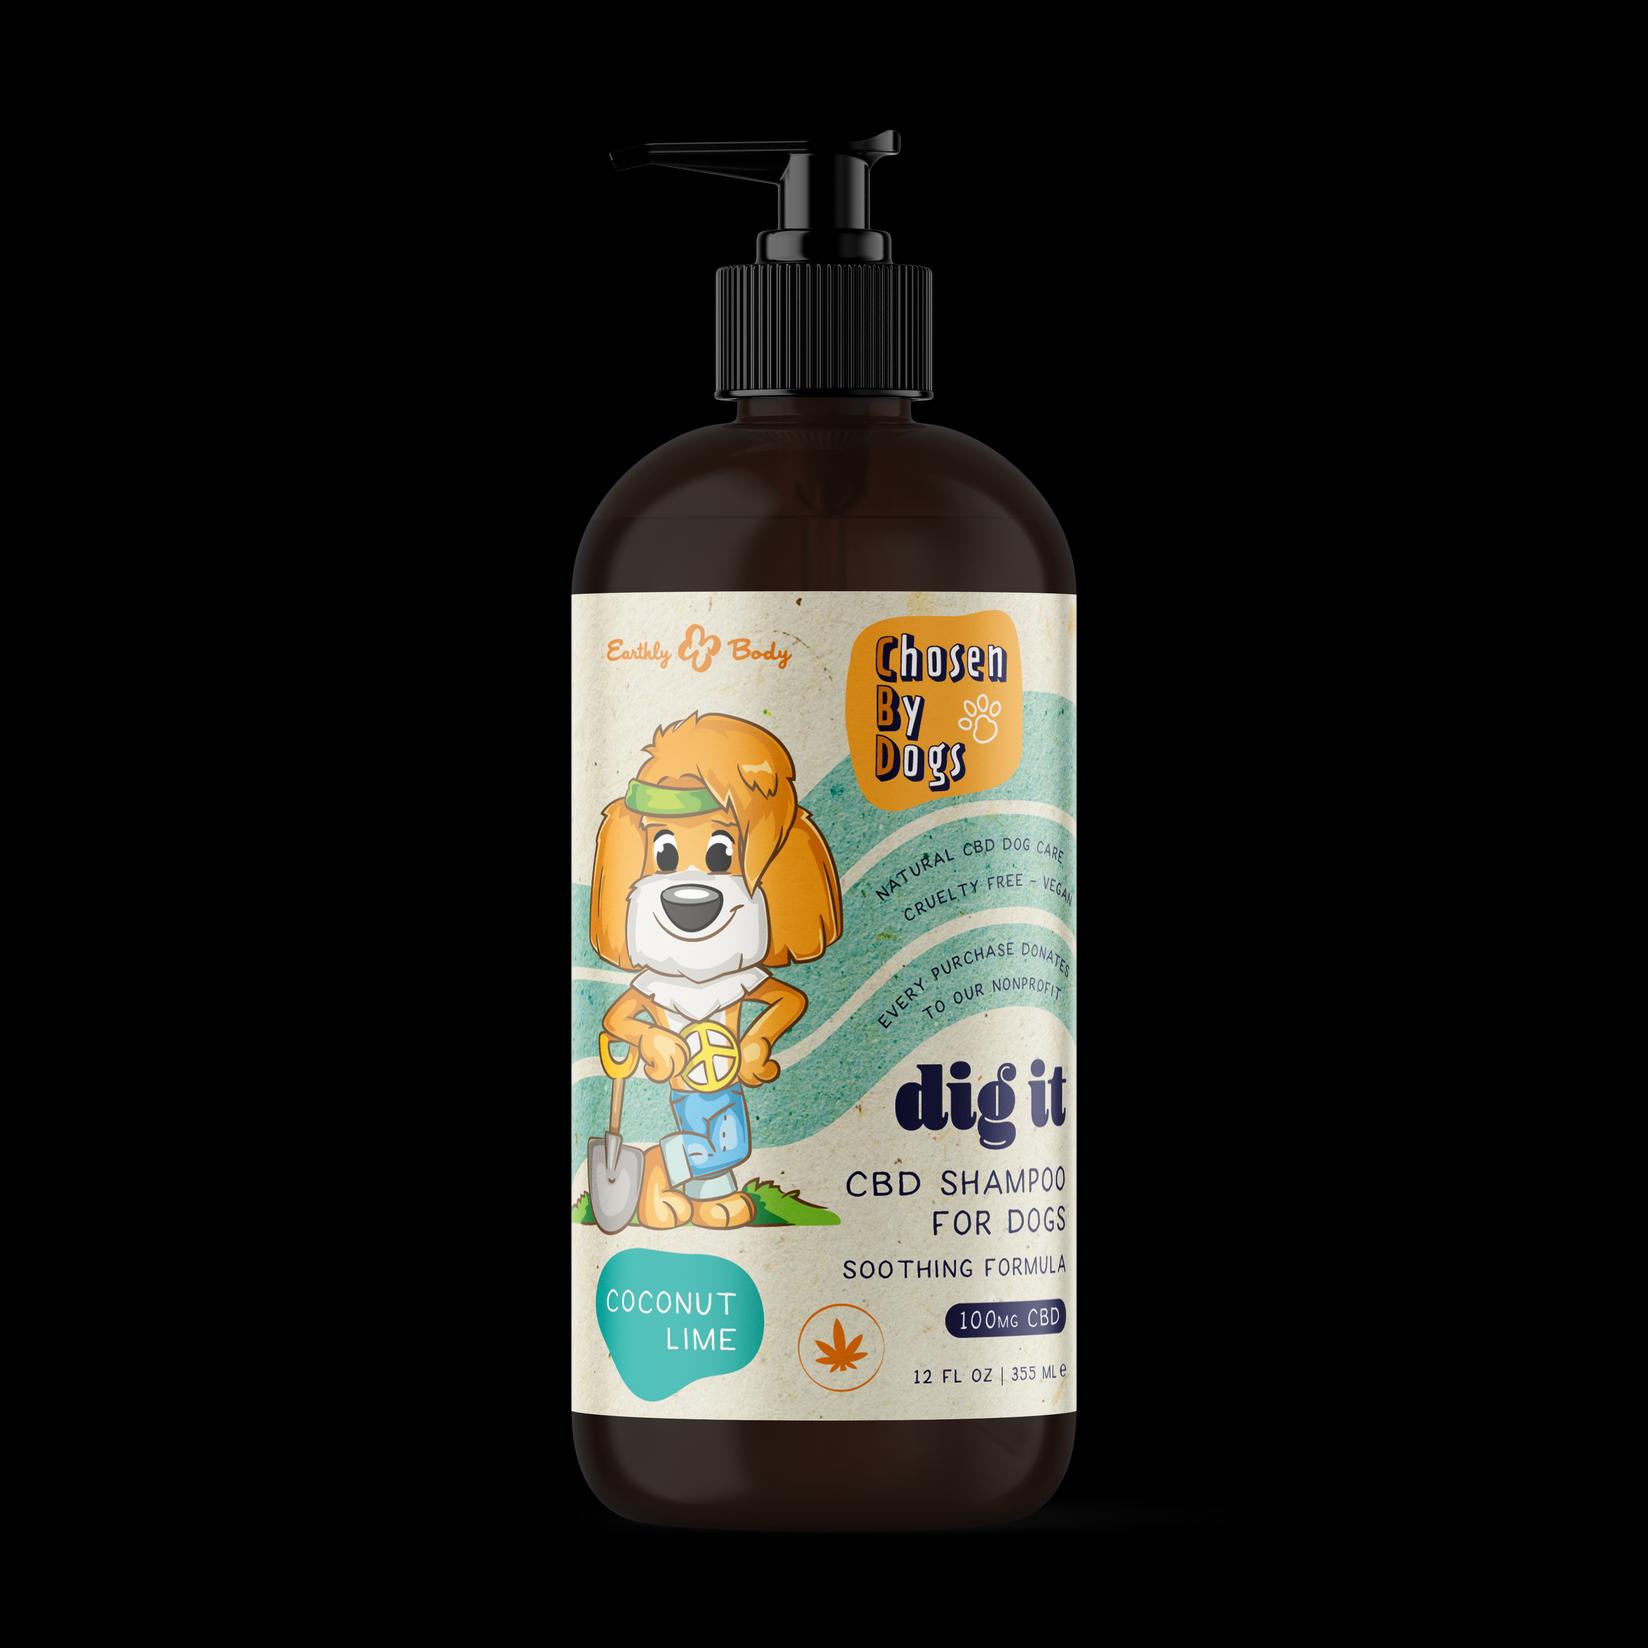 Selected image for DIG IT CBD Shampoo for dogs -  Šampon za pse, soothing formula